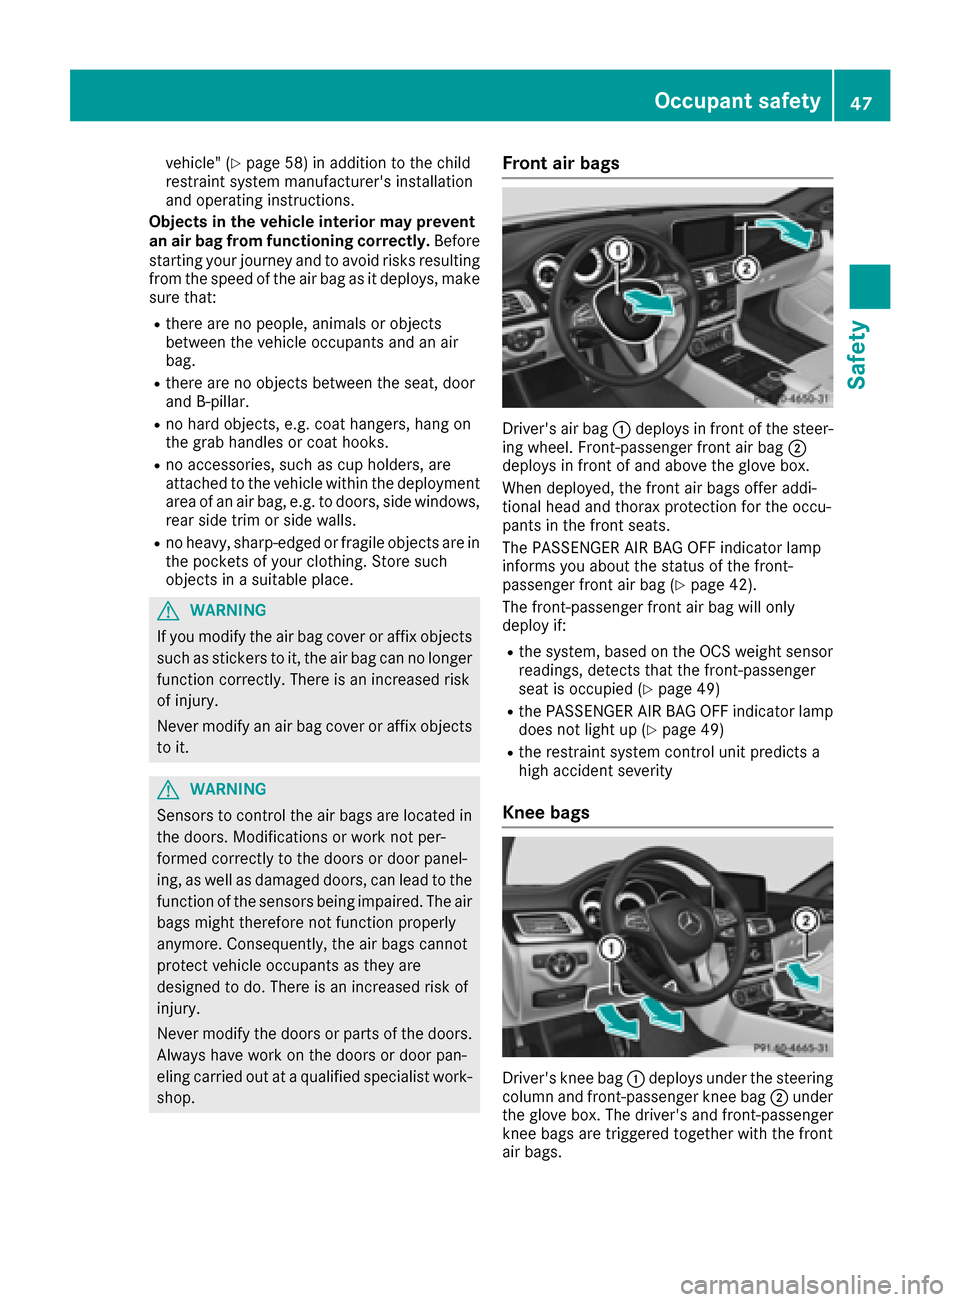 MERCEDES-BENZ CLS-Class 2016 W218 Owners Manual vehicle" (Ypage 58) in addition to the child
restraint system manufacturers installation
and operating instructions.
Objects in the vehicle interior may prevent
an air bag from functioning correctly.